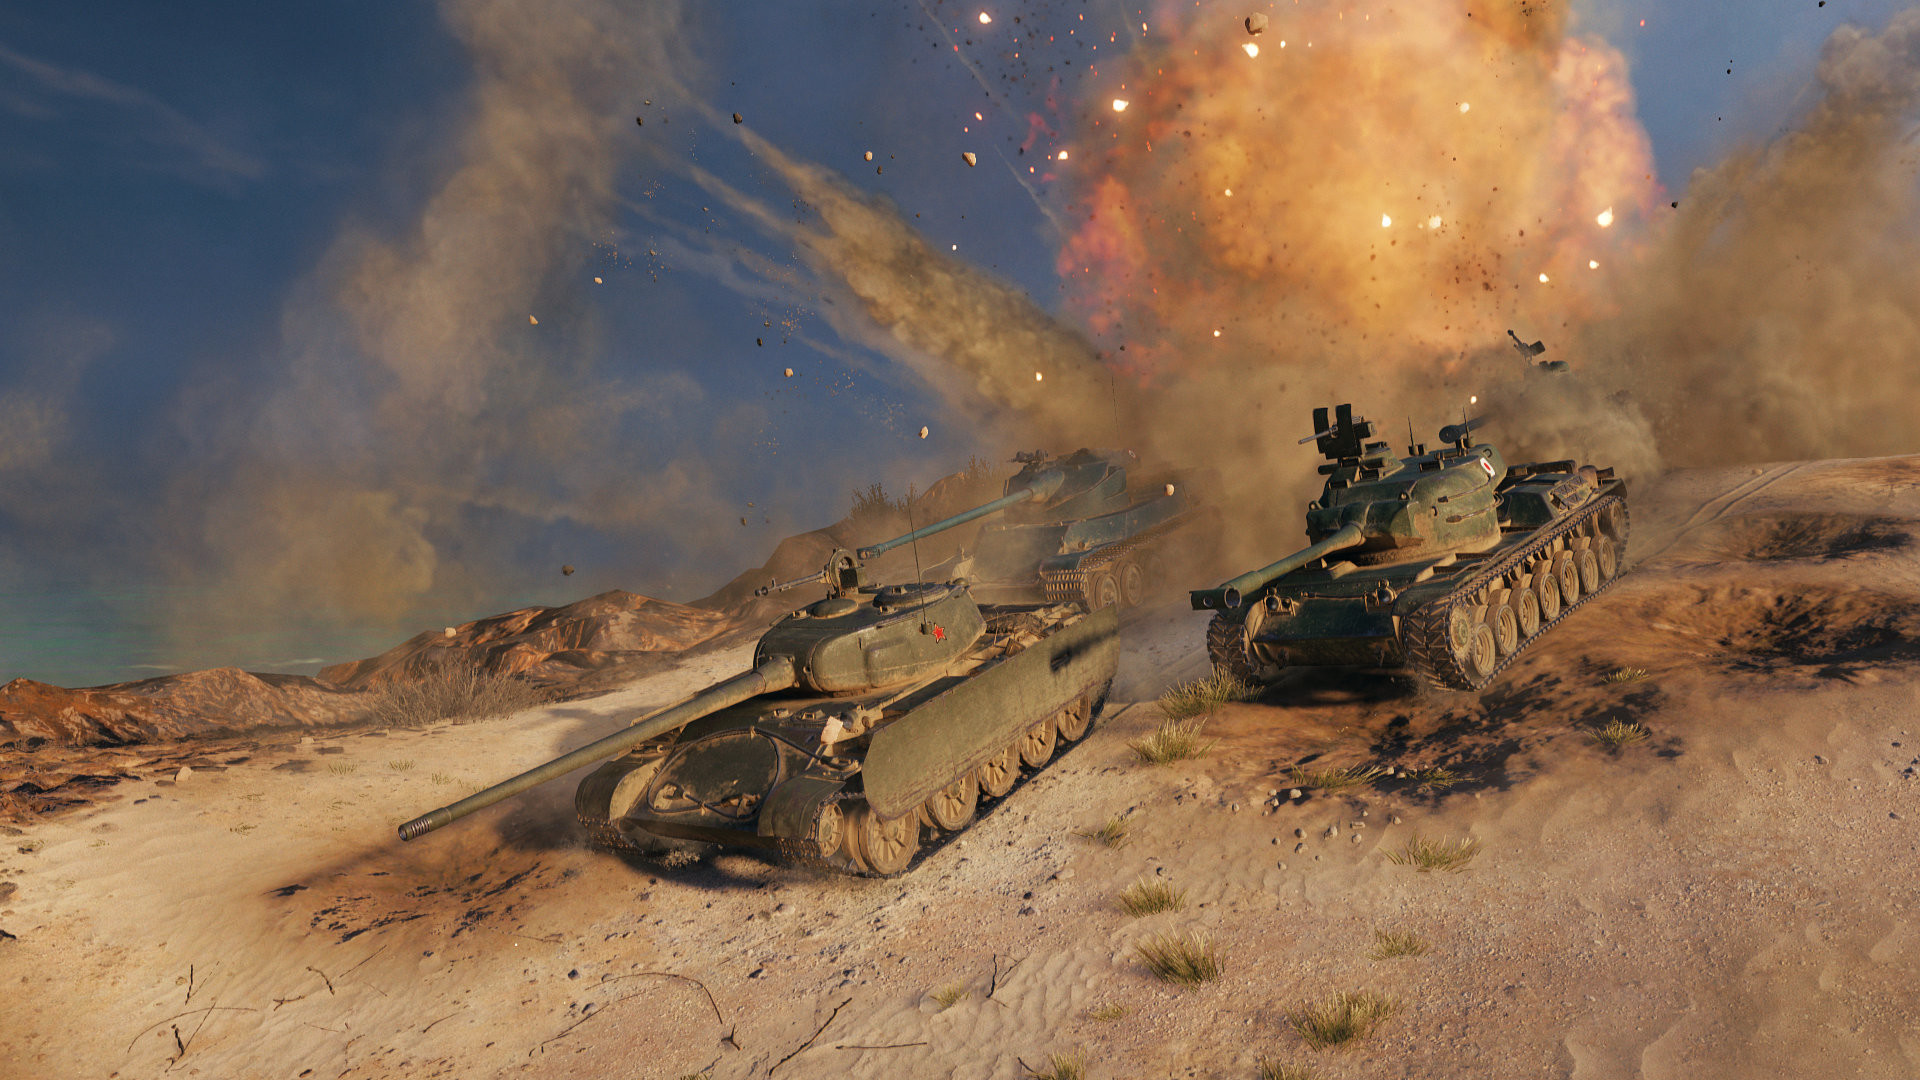 Why millions of people still play World of Tanks